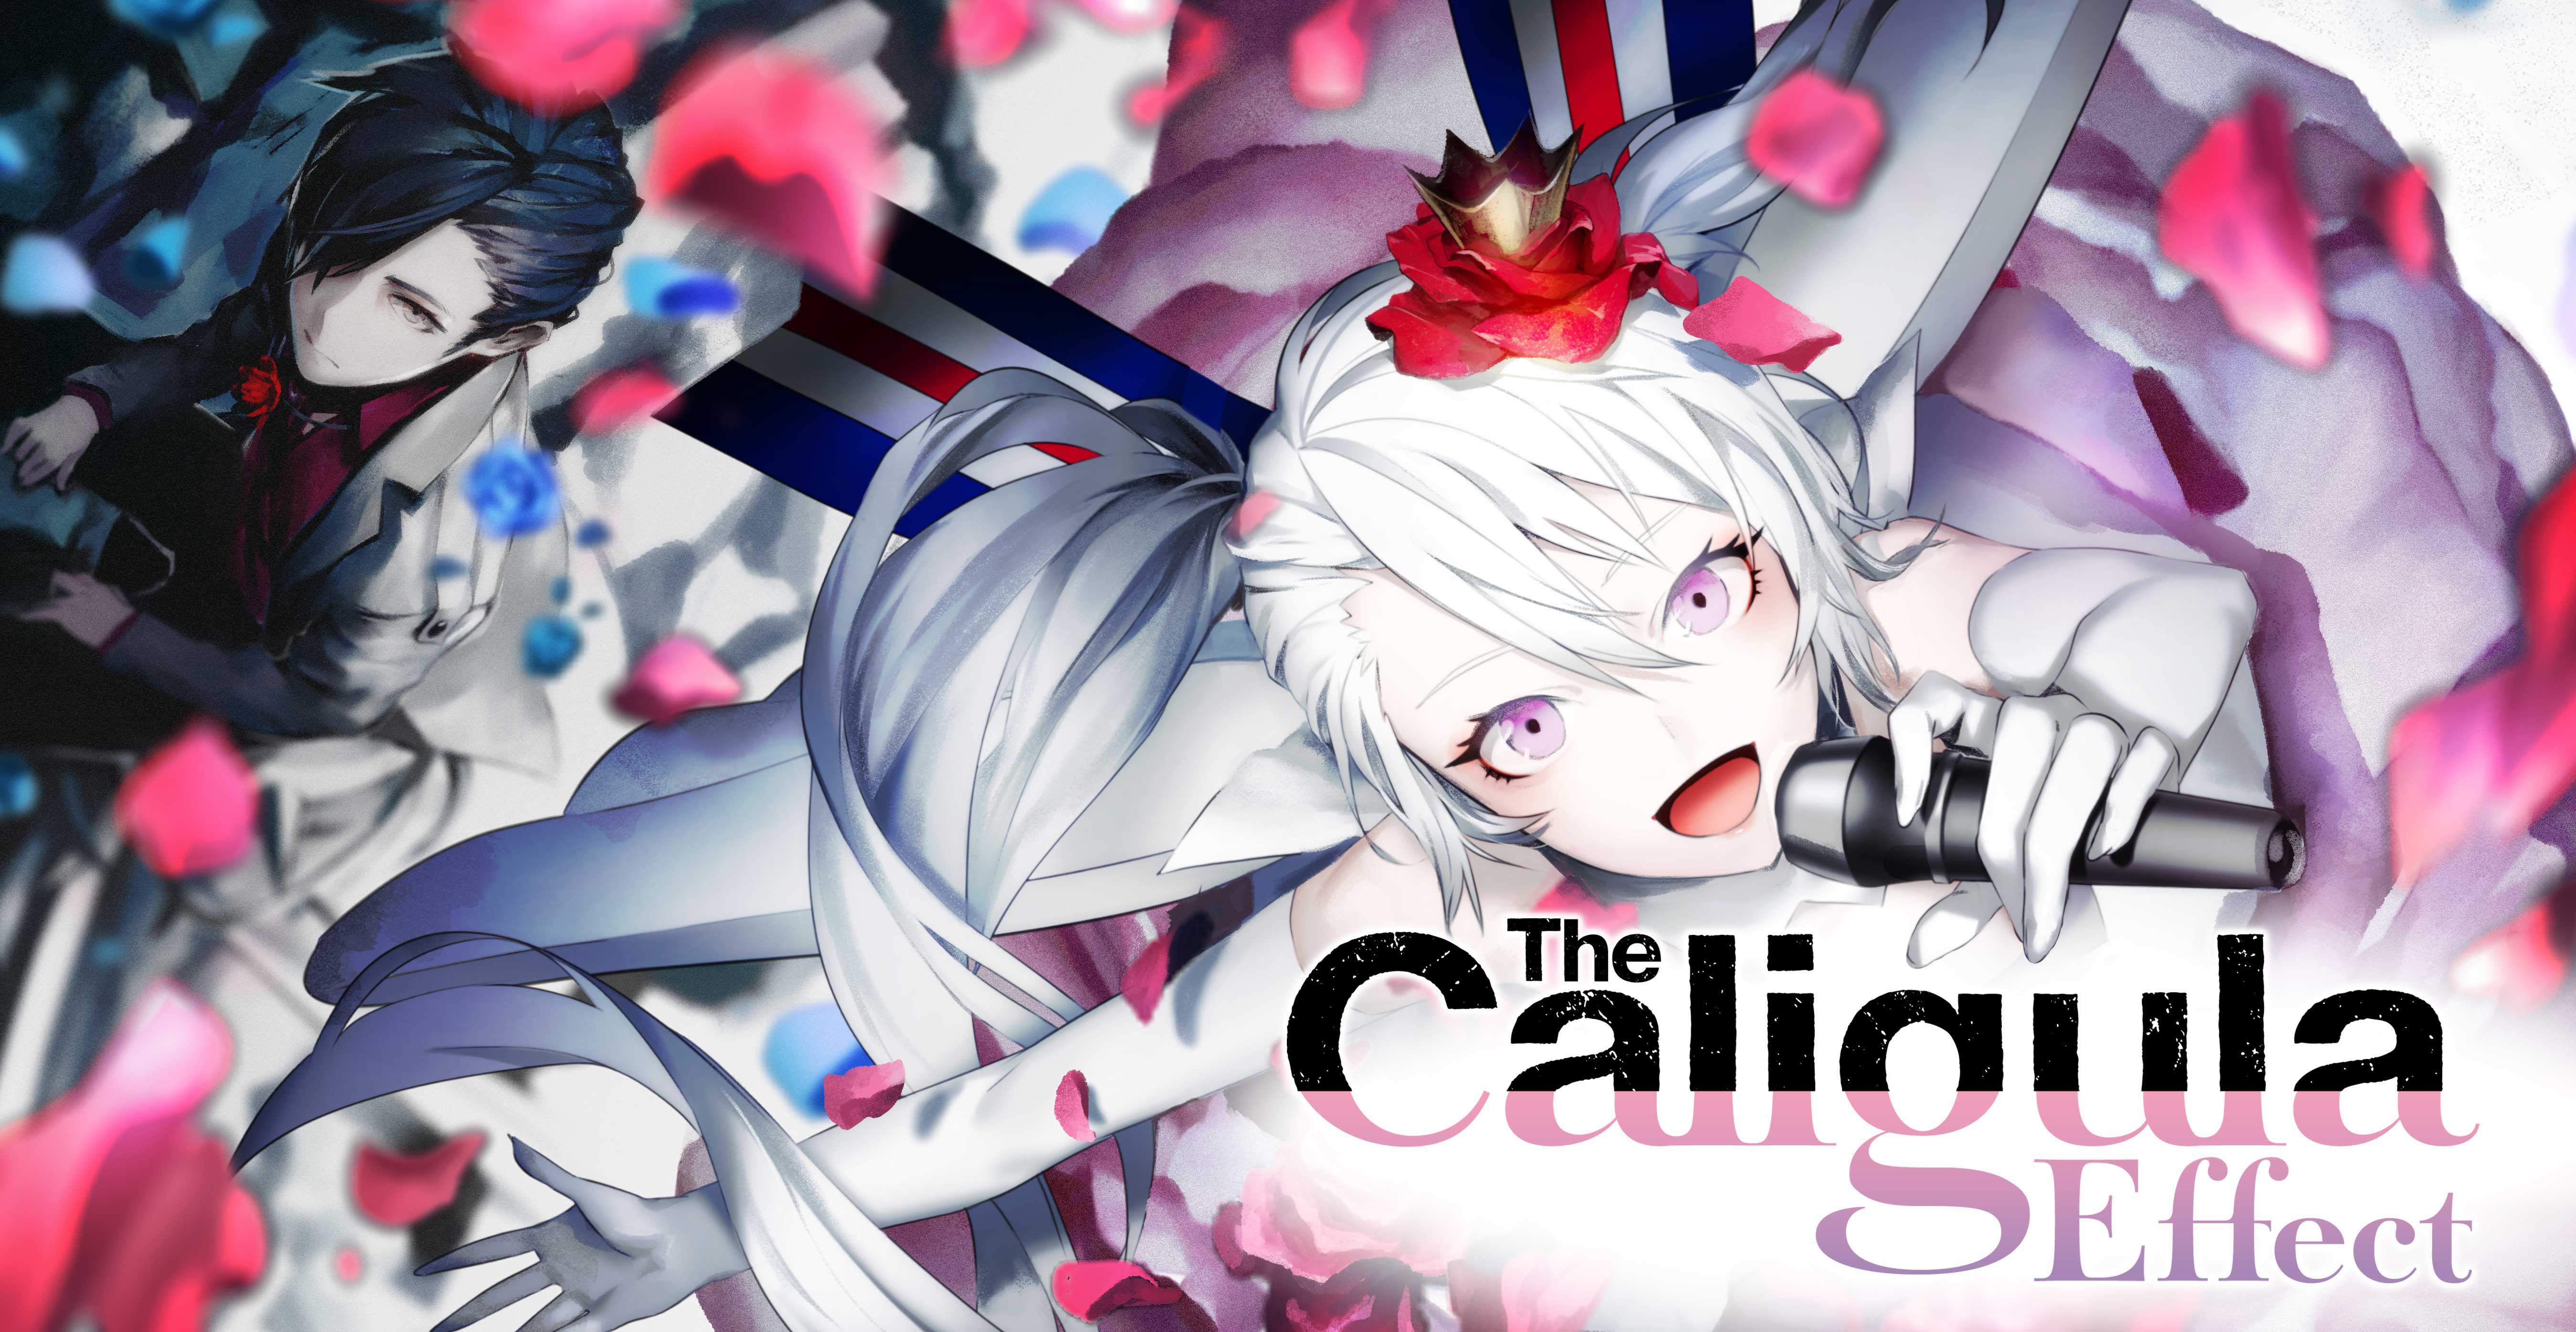 instal the last version for mac The Caligula Effect 2